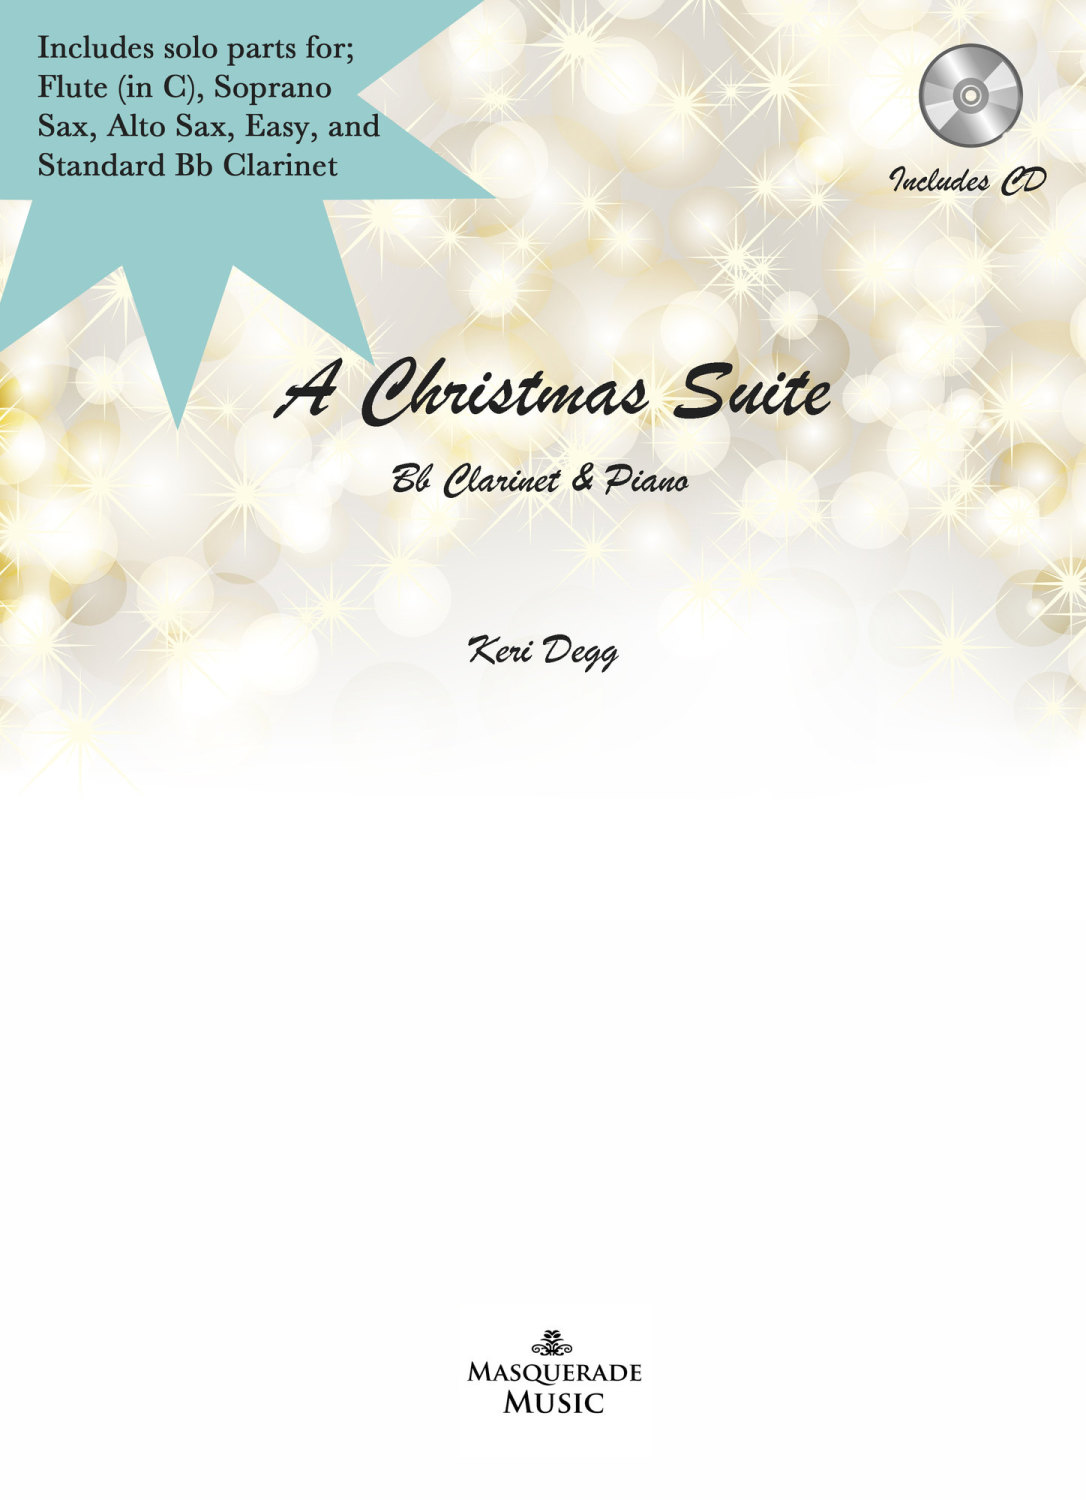 A Christmas Suite - Multi solo instrument option & Piano (incl CD)